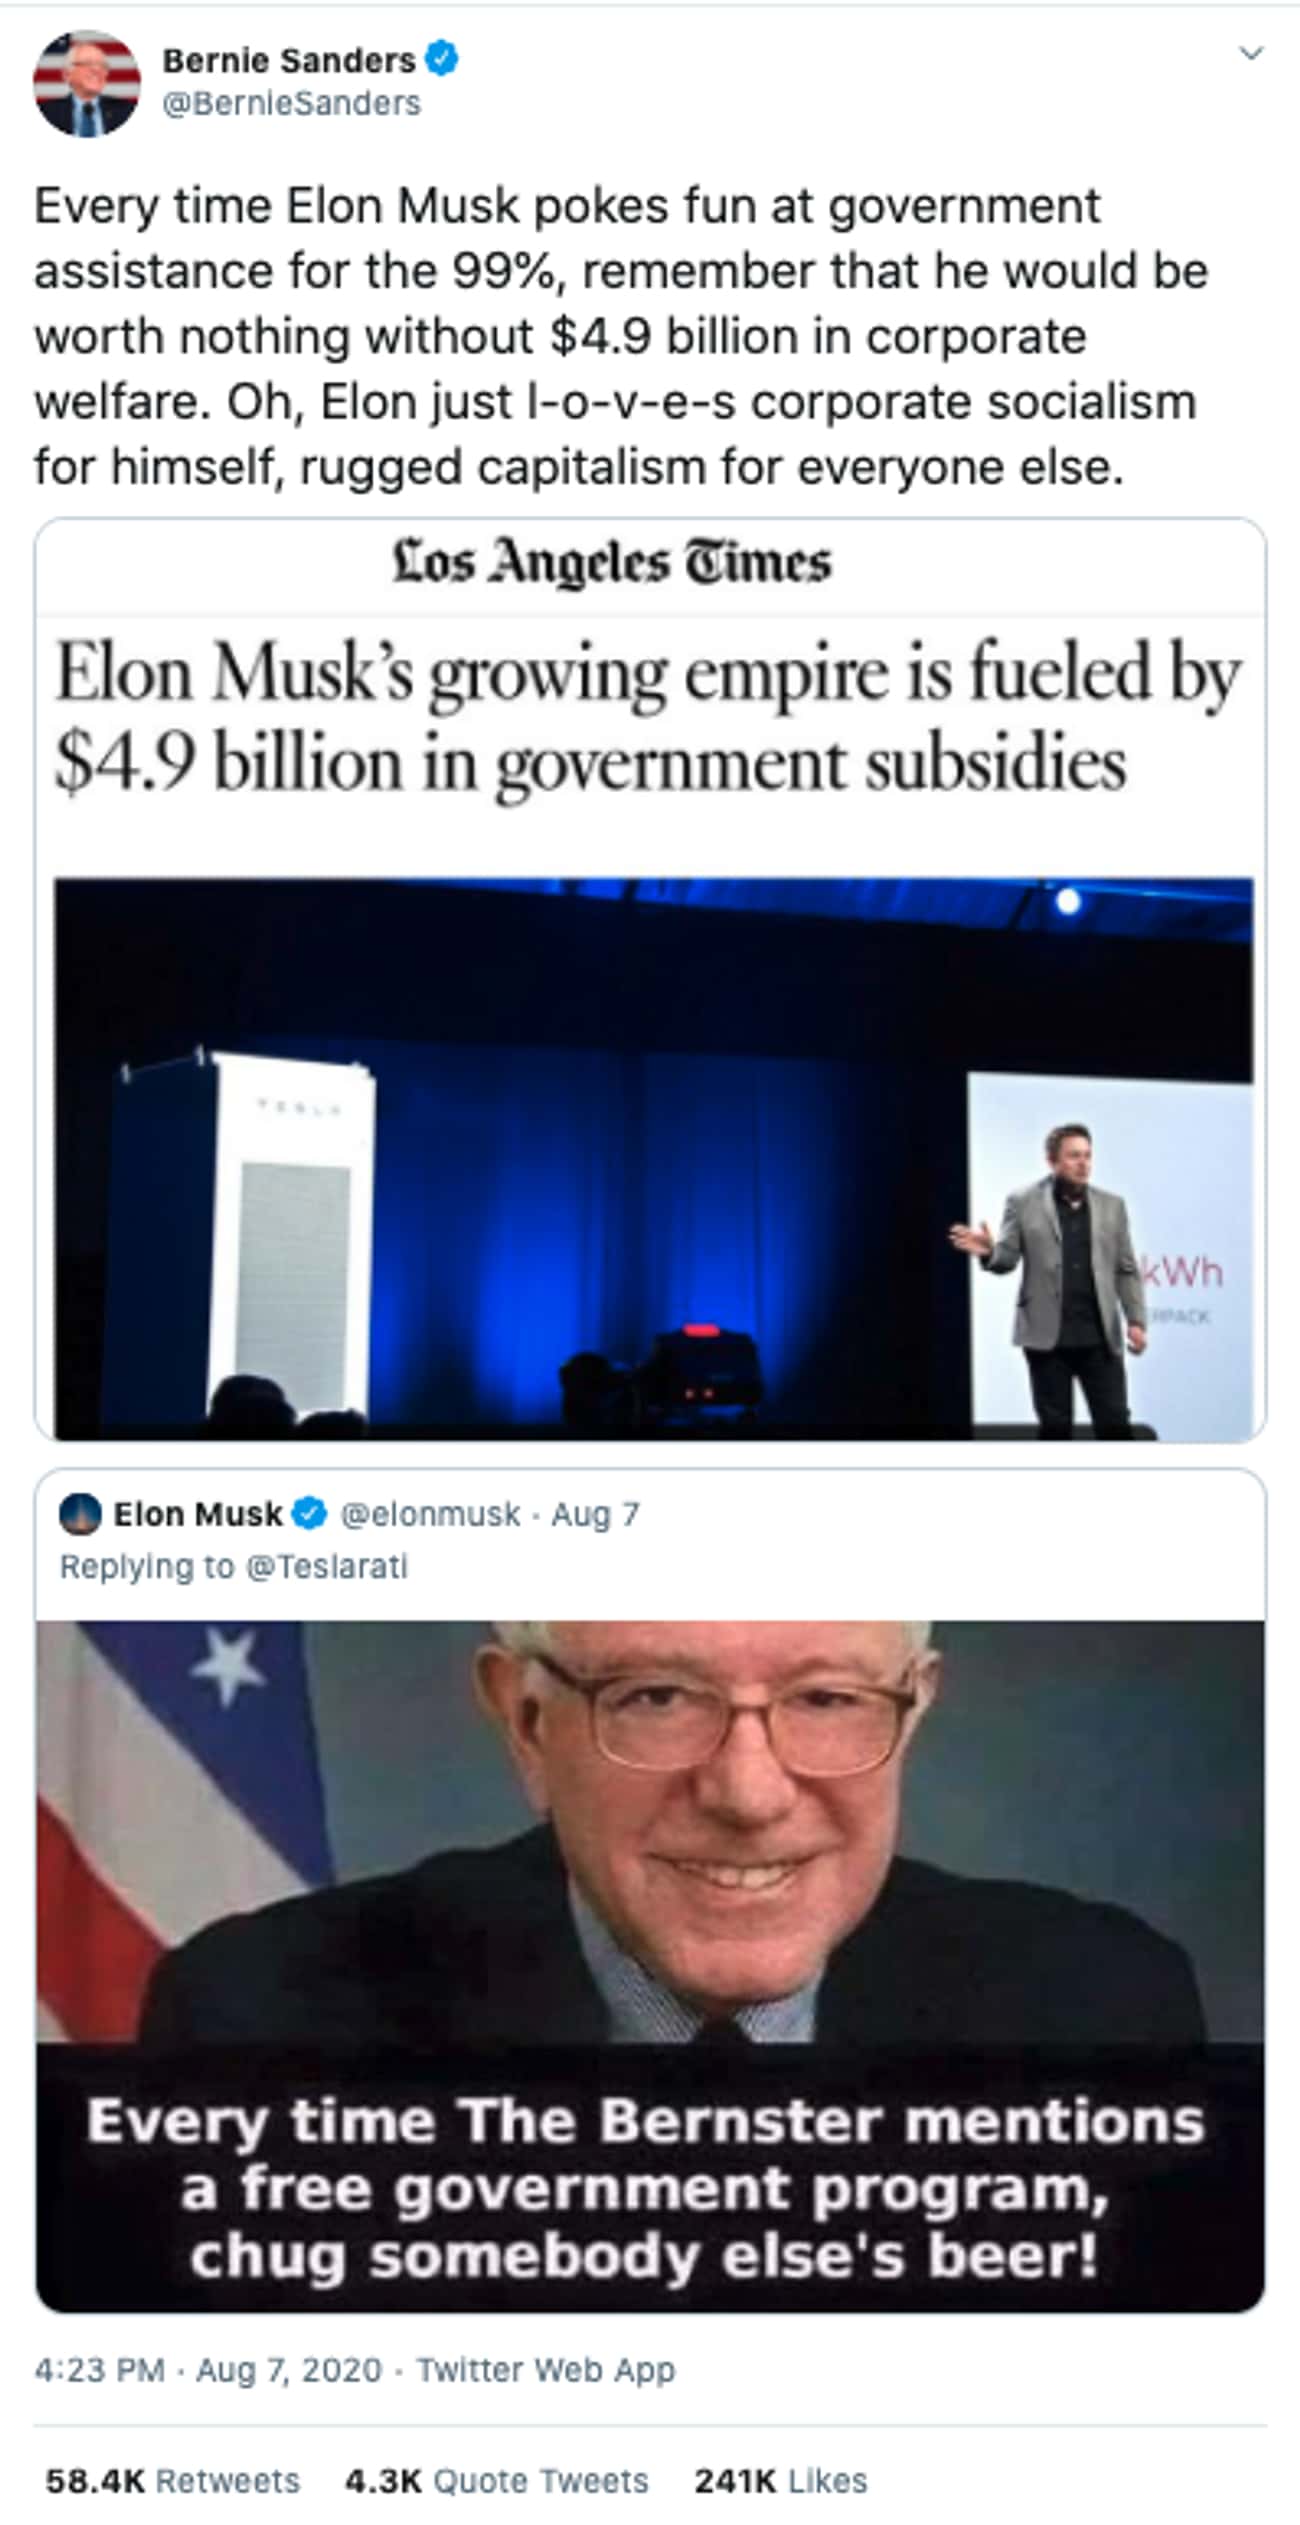 celebs savage replies - media - Bernie Sanders Sanders Every time Elon Musk pokes fun at government assistance for the 99%, remember that he would be worth nothing without $4.9 billion in corporate welfare. Oh, Elon just loves corporate socialism for hims